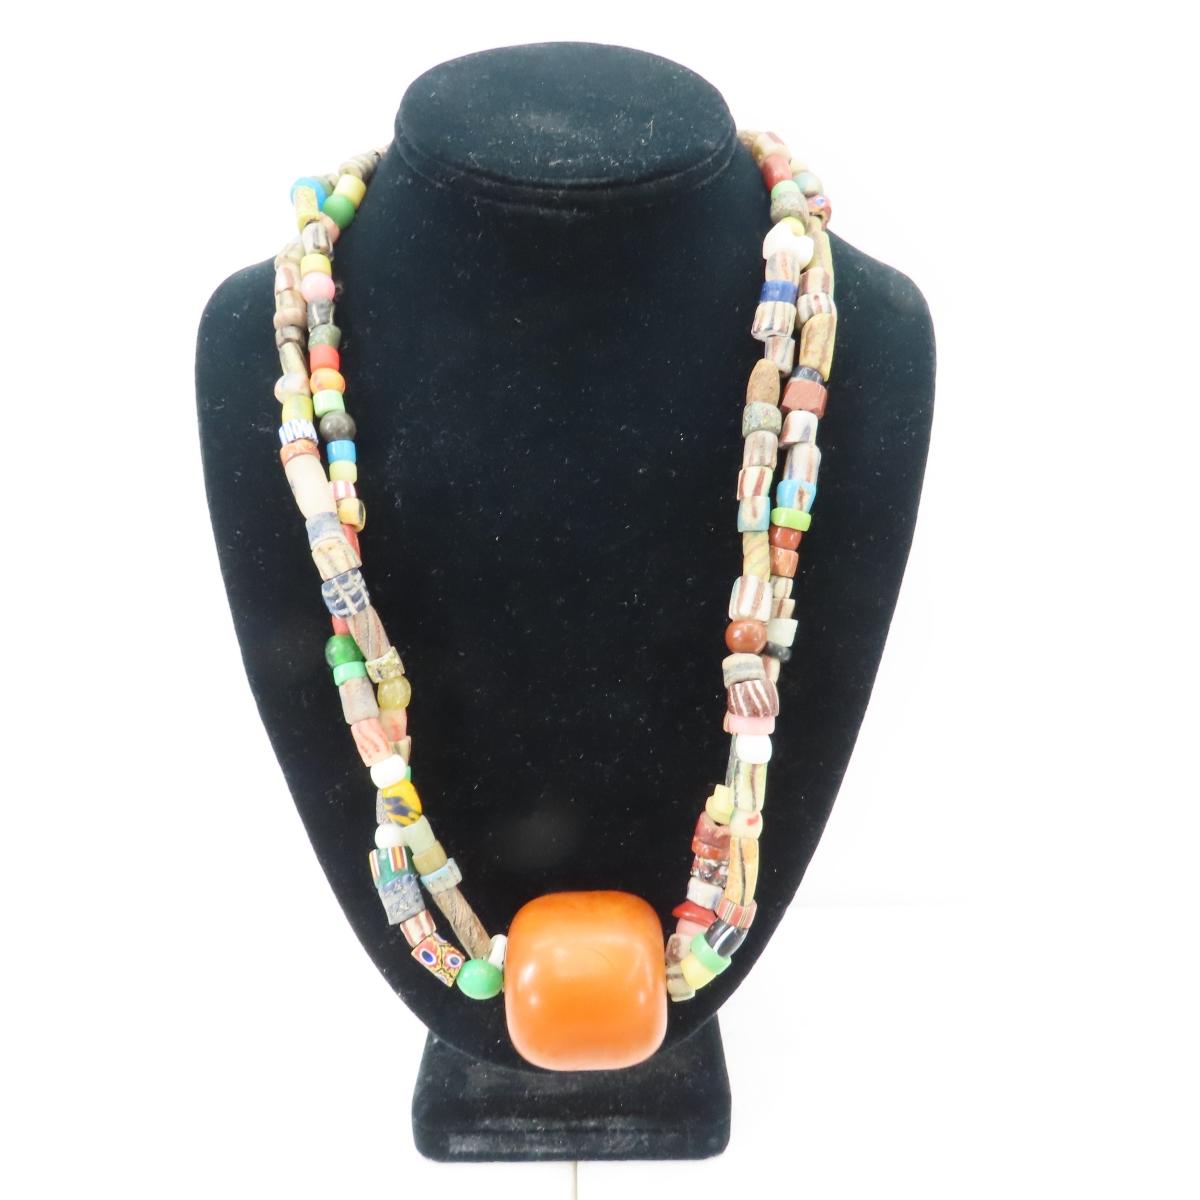 Ann Maurice, African, Shell and Other Bead Jewelry